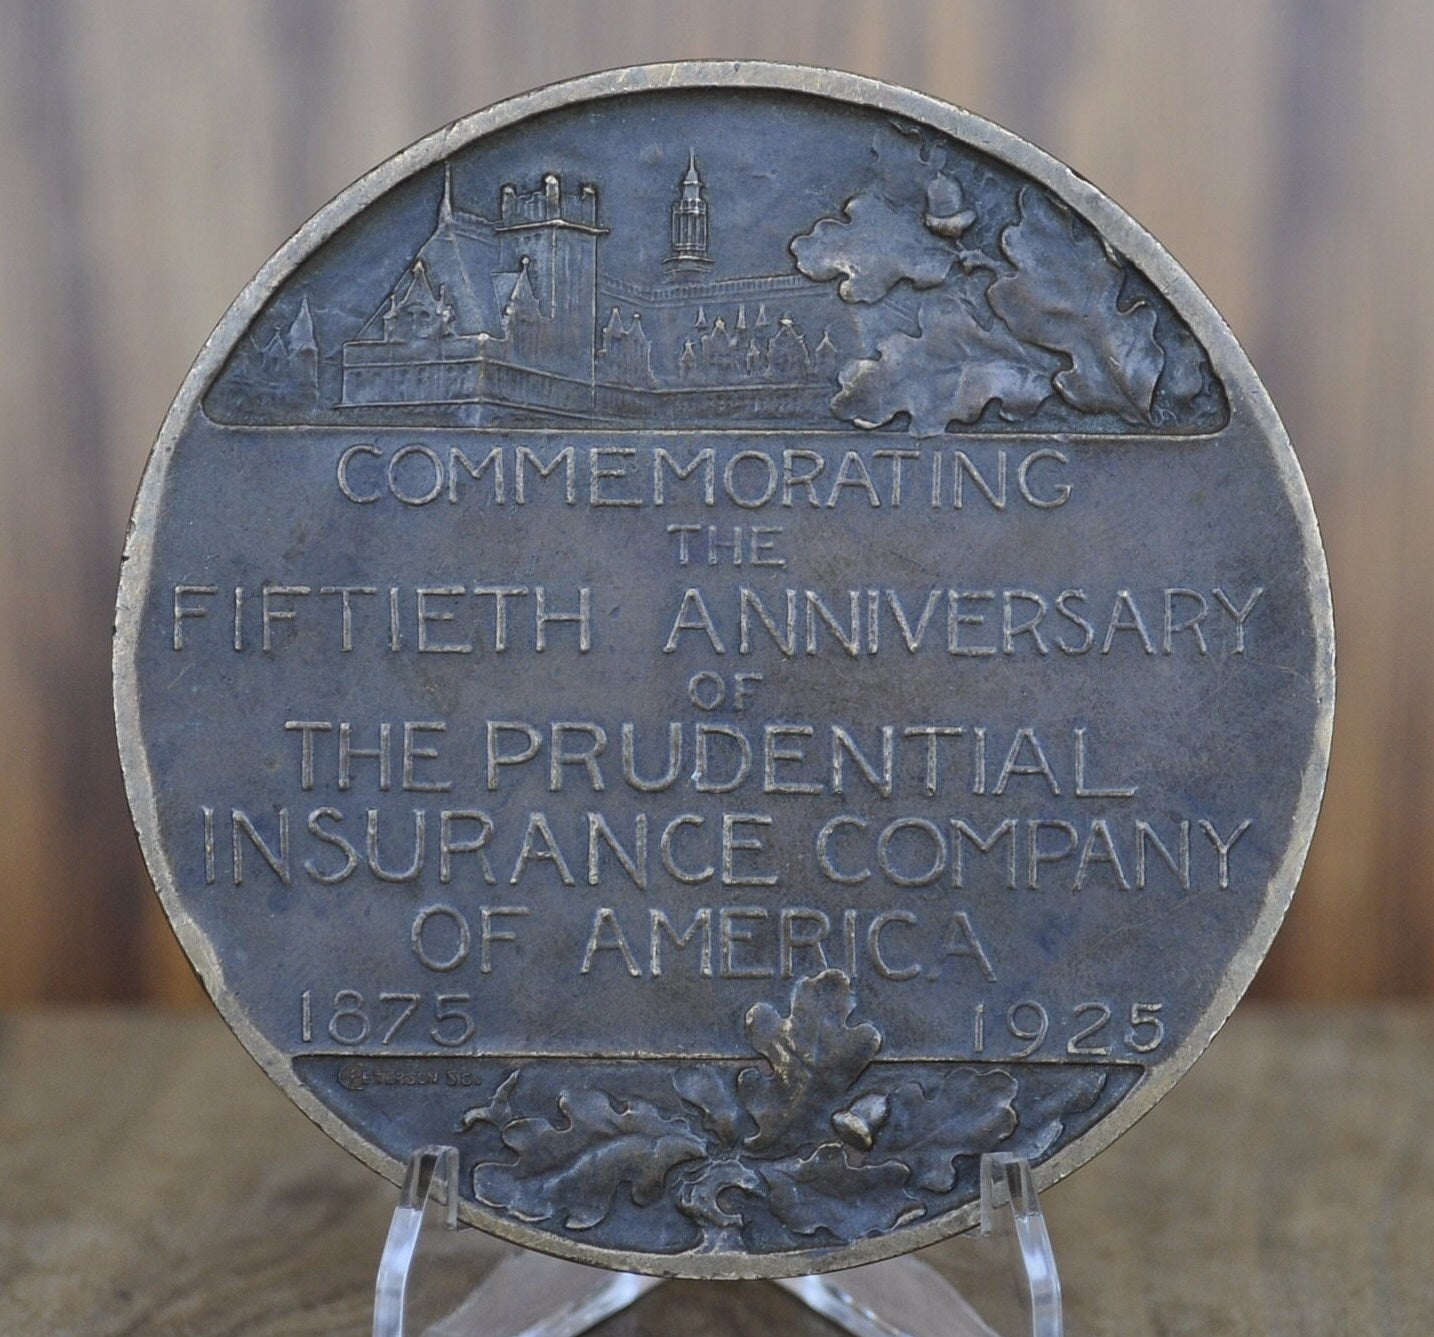 1925 Prudential Commemorative Token - Very Large Medal (weighing in at 5.1 ounces) - Bronze - Prudential Insurance Company Anniversary Medal